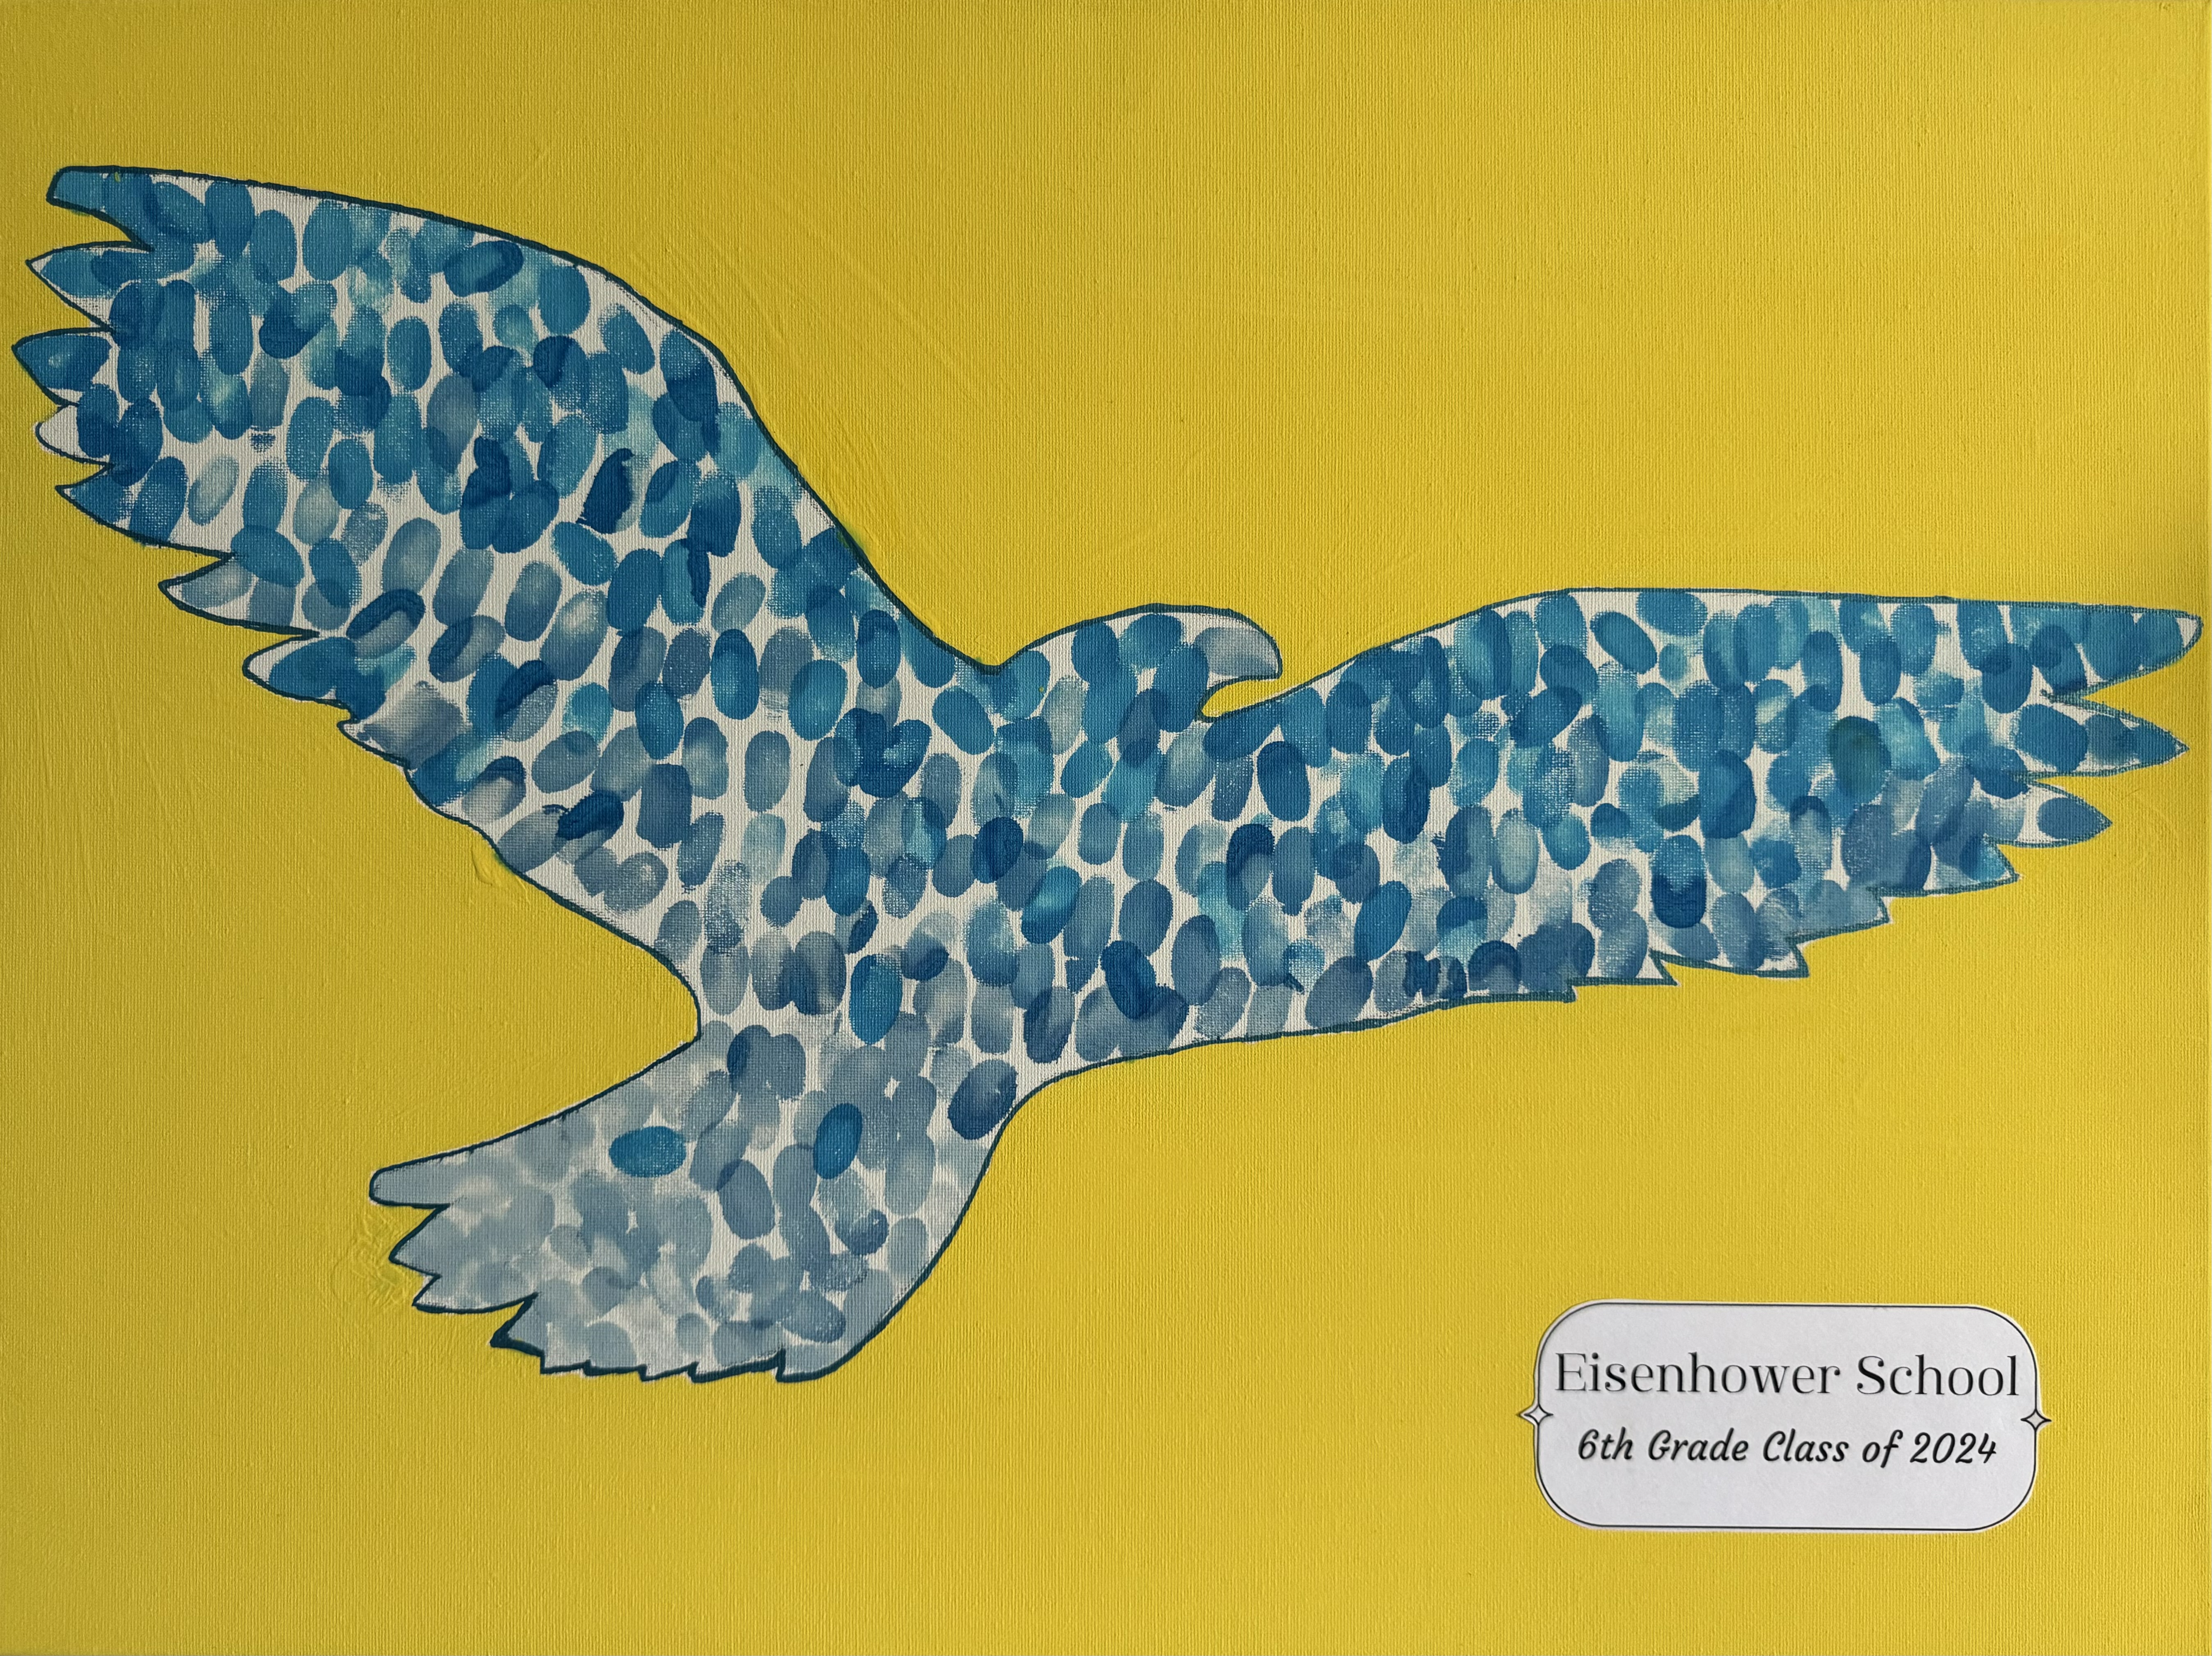 Outline of an eagle filled with student thumbprints in blue ink